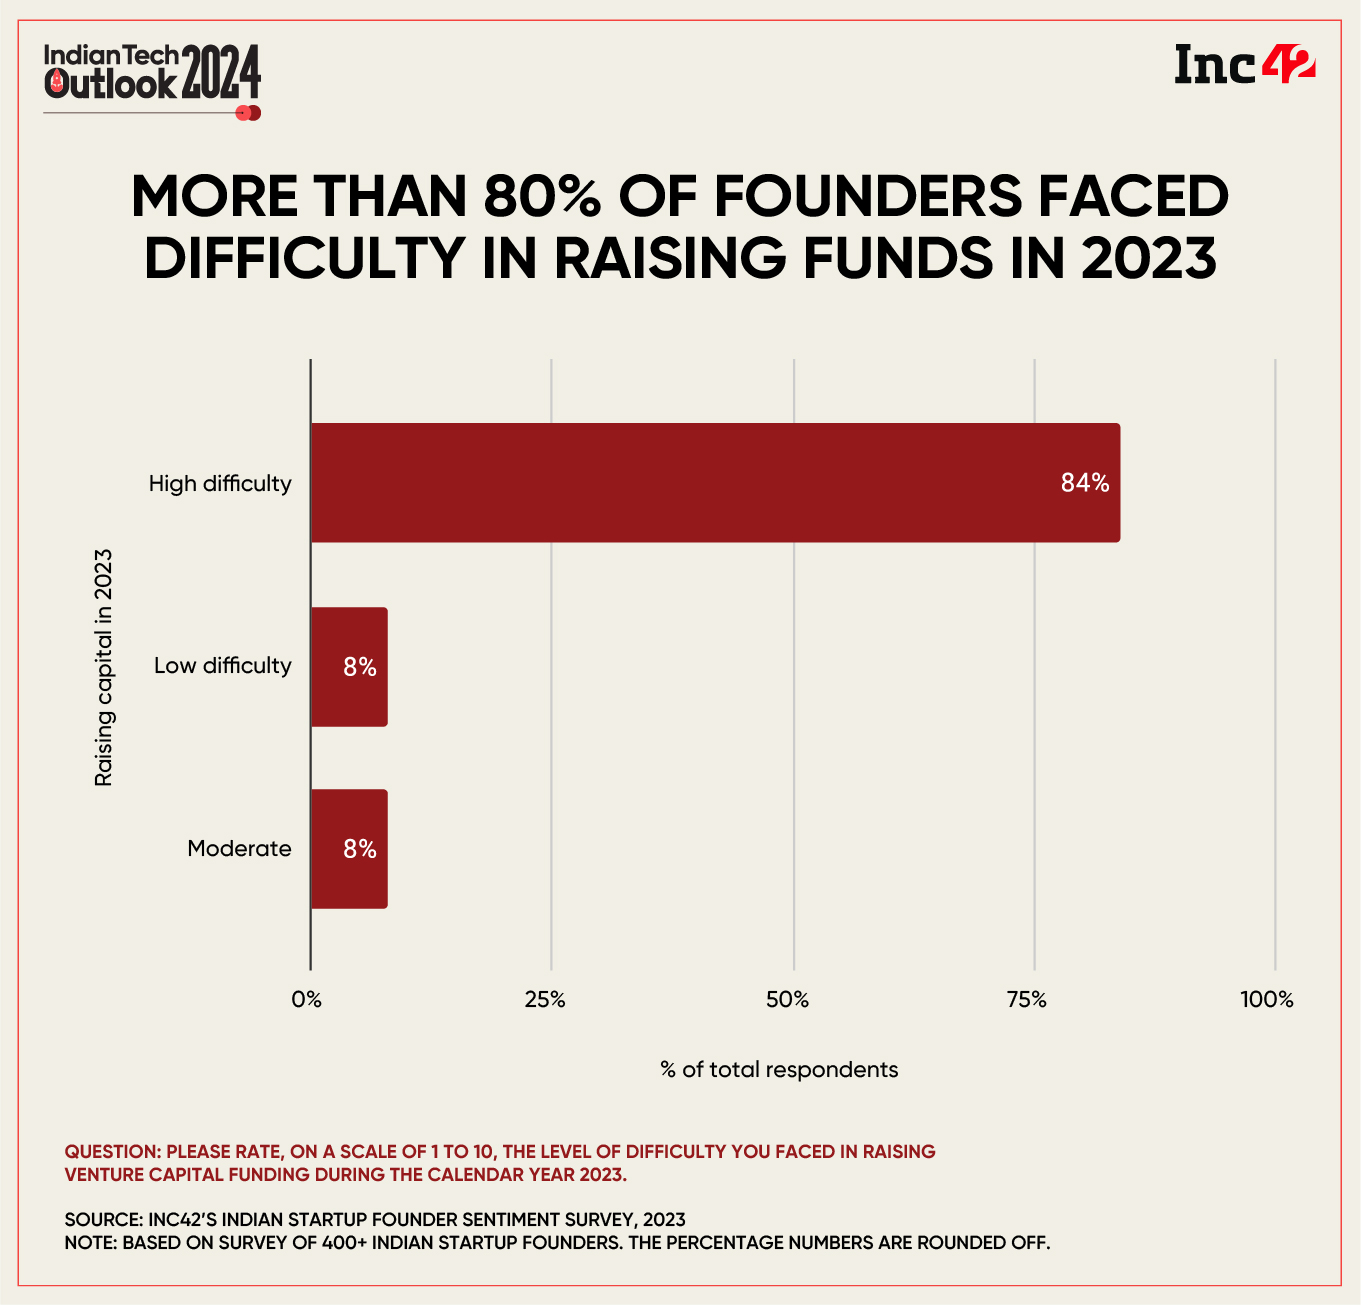 Of more than 400 founders surveyed by Inc42, 84% conceded that they faced ‘high difficulty’ in raising funds in 2023.